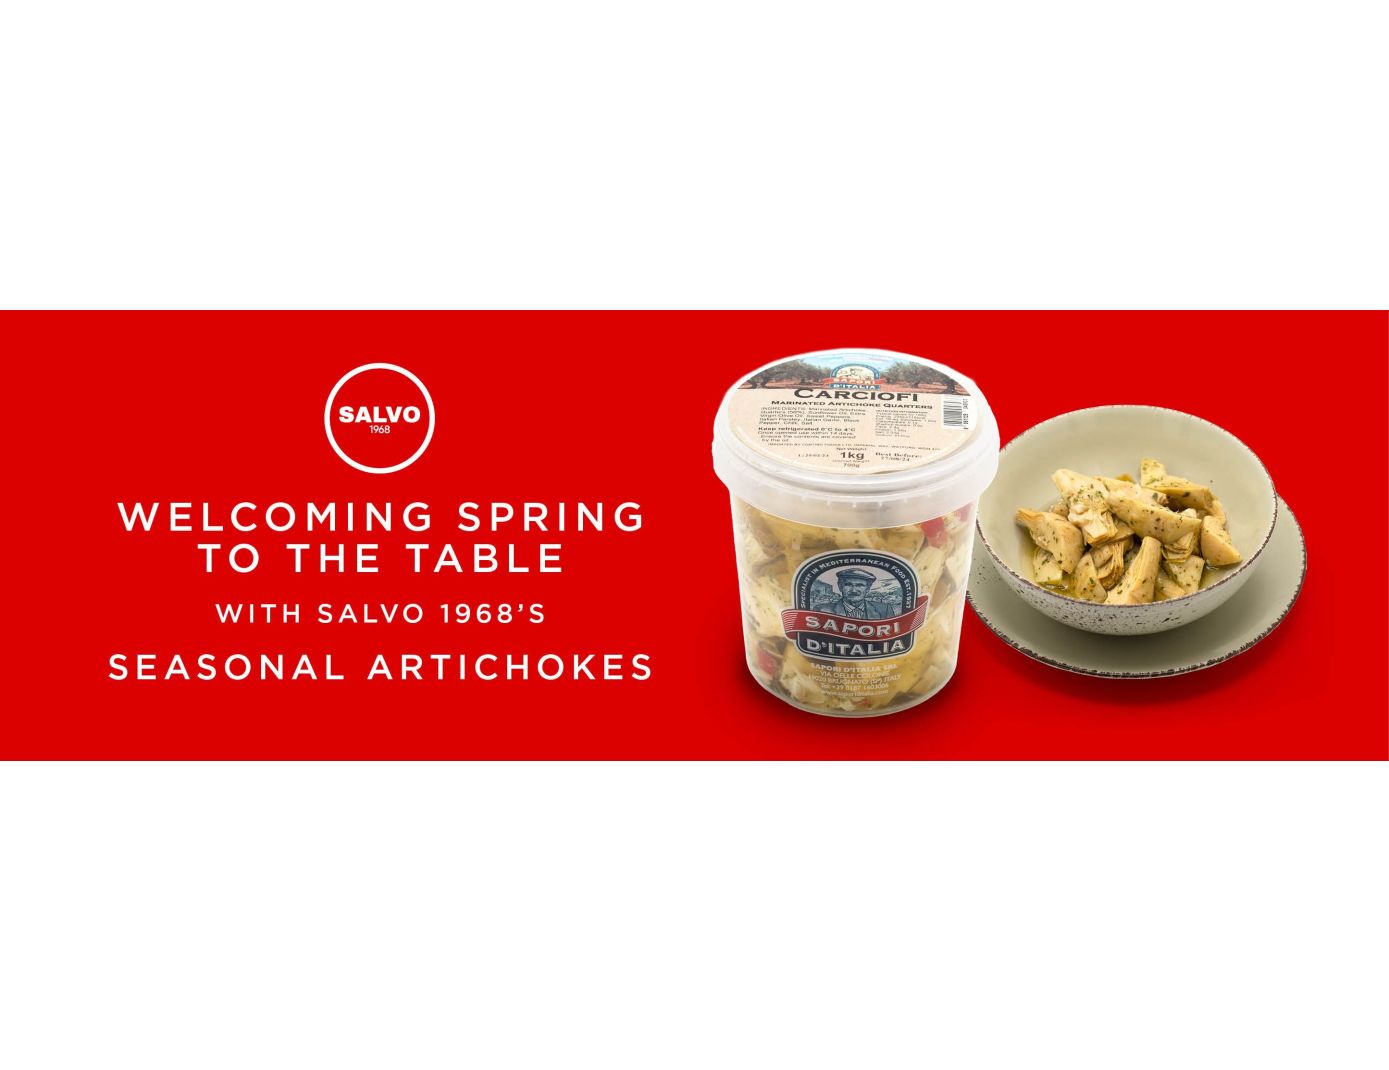 Welcoming Spring to the Table with Salvo 1968's Seasonal Artichokes